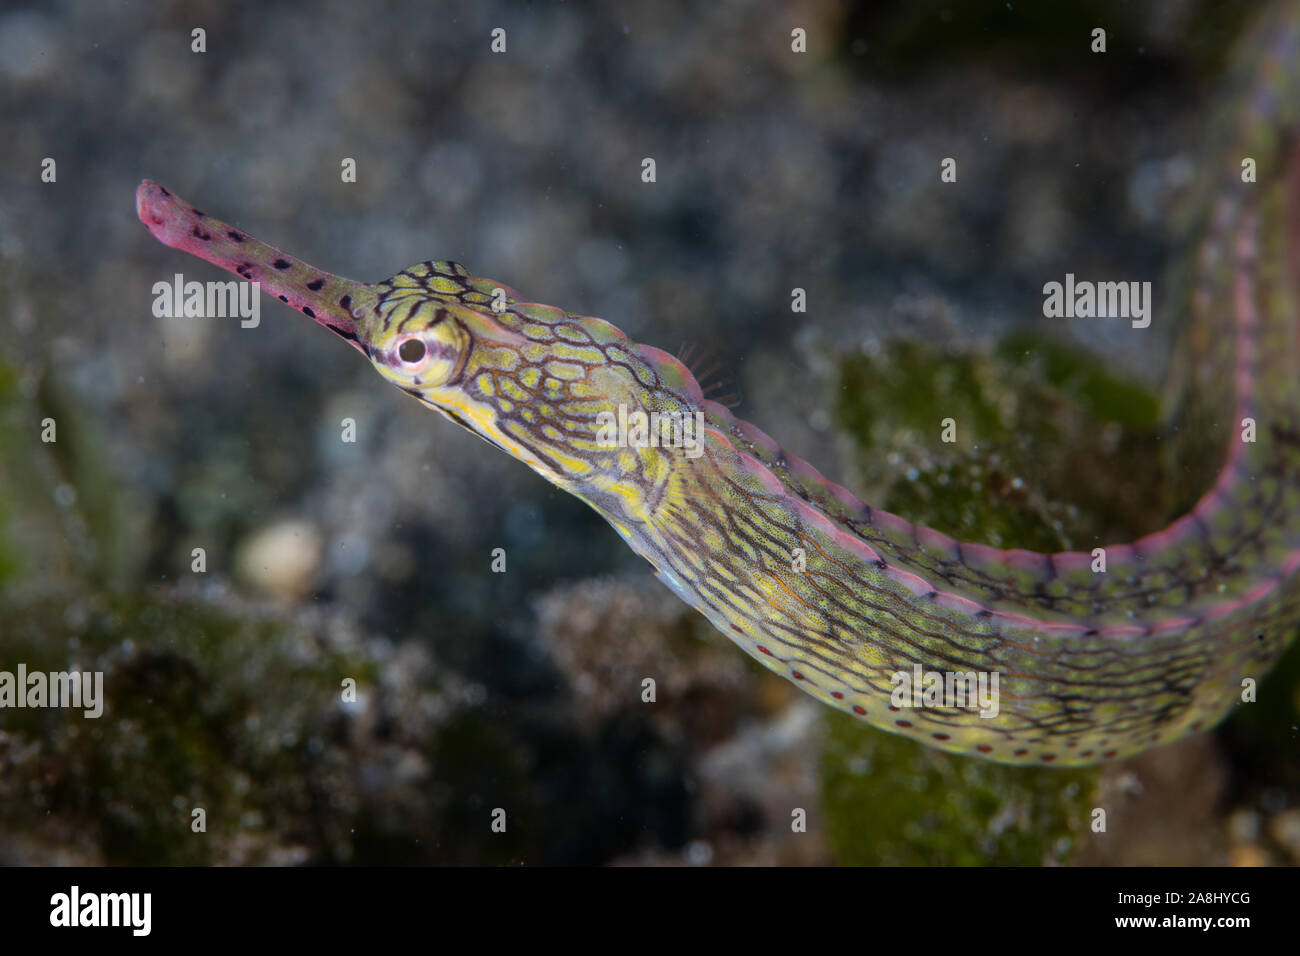 A Yellow-spotted pipefish, Corythoichthys polynotatus, swims over the shallow, sandy seafloor in Indonesia searching for planktonic prey. Stock Photo